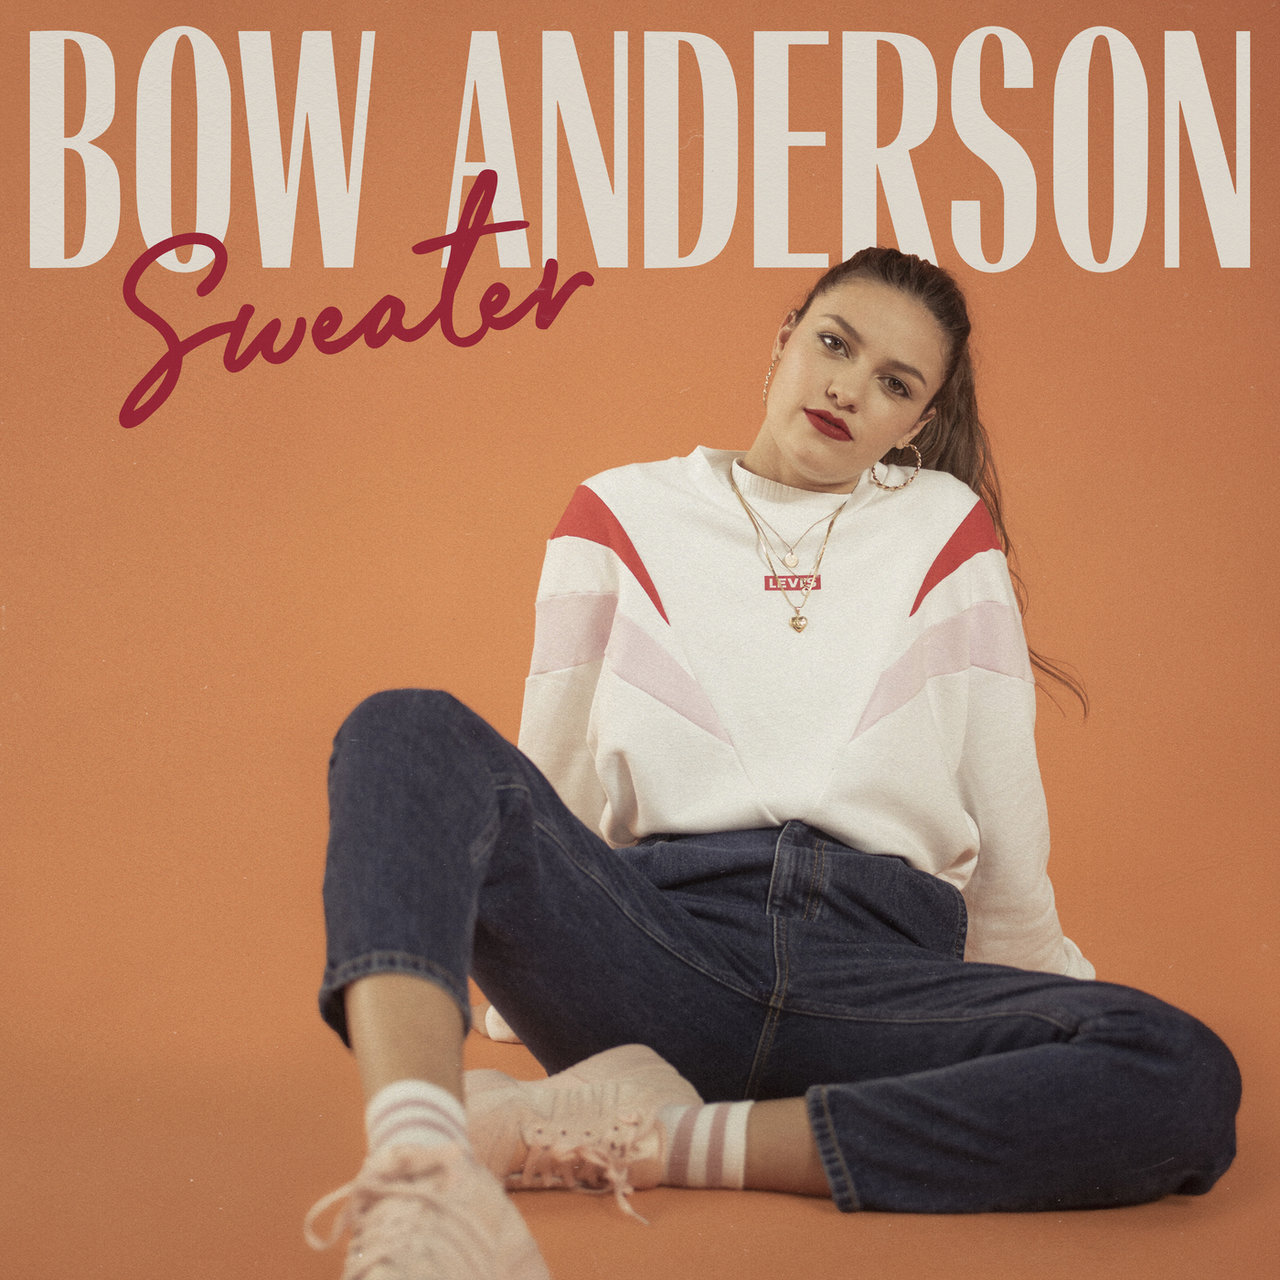 Bow Anderson Sweater cover artwork